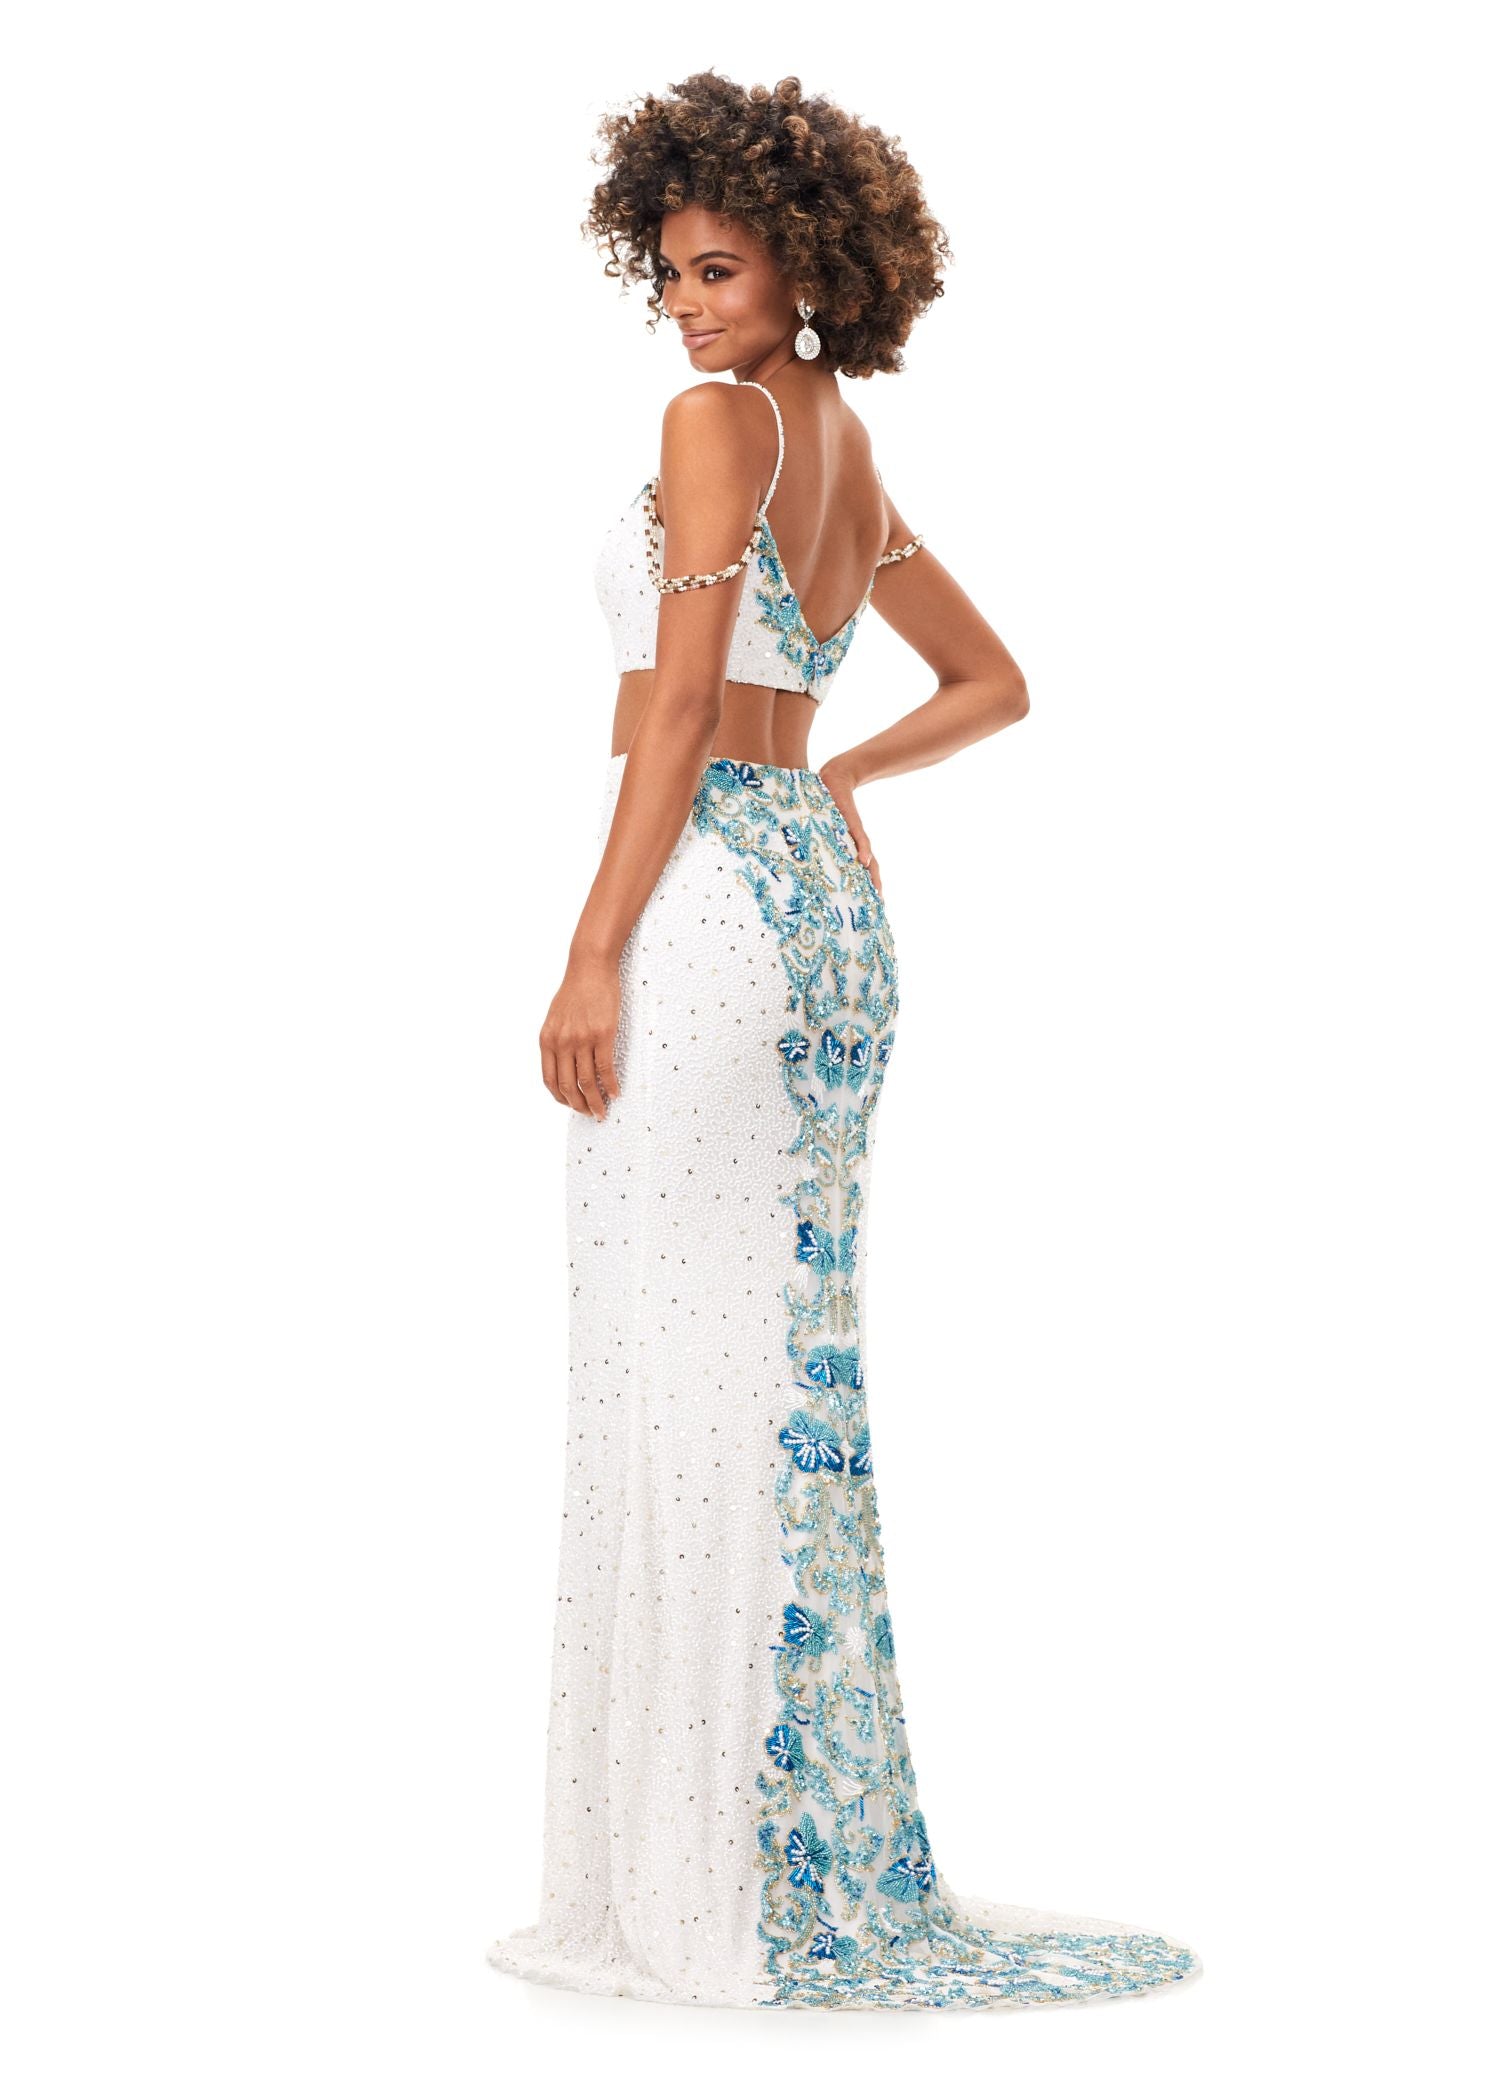 Ashley Lauren 11353 This spaghetti strap beaded gown features an intricately beaded bustline accented by shoulder draped straps. The intricate bead pattern continues onto the back and is finished with a sweep train. Sweetheart Neckline Spaghetti Straps Two-Piece Fully Hand Beaded COLORS: Periwinkle, Ivory, Black